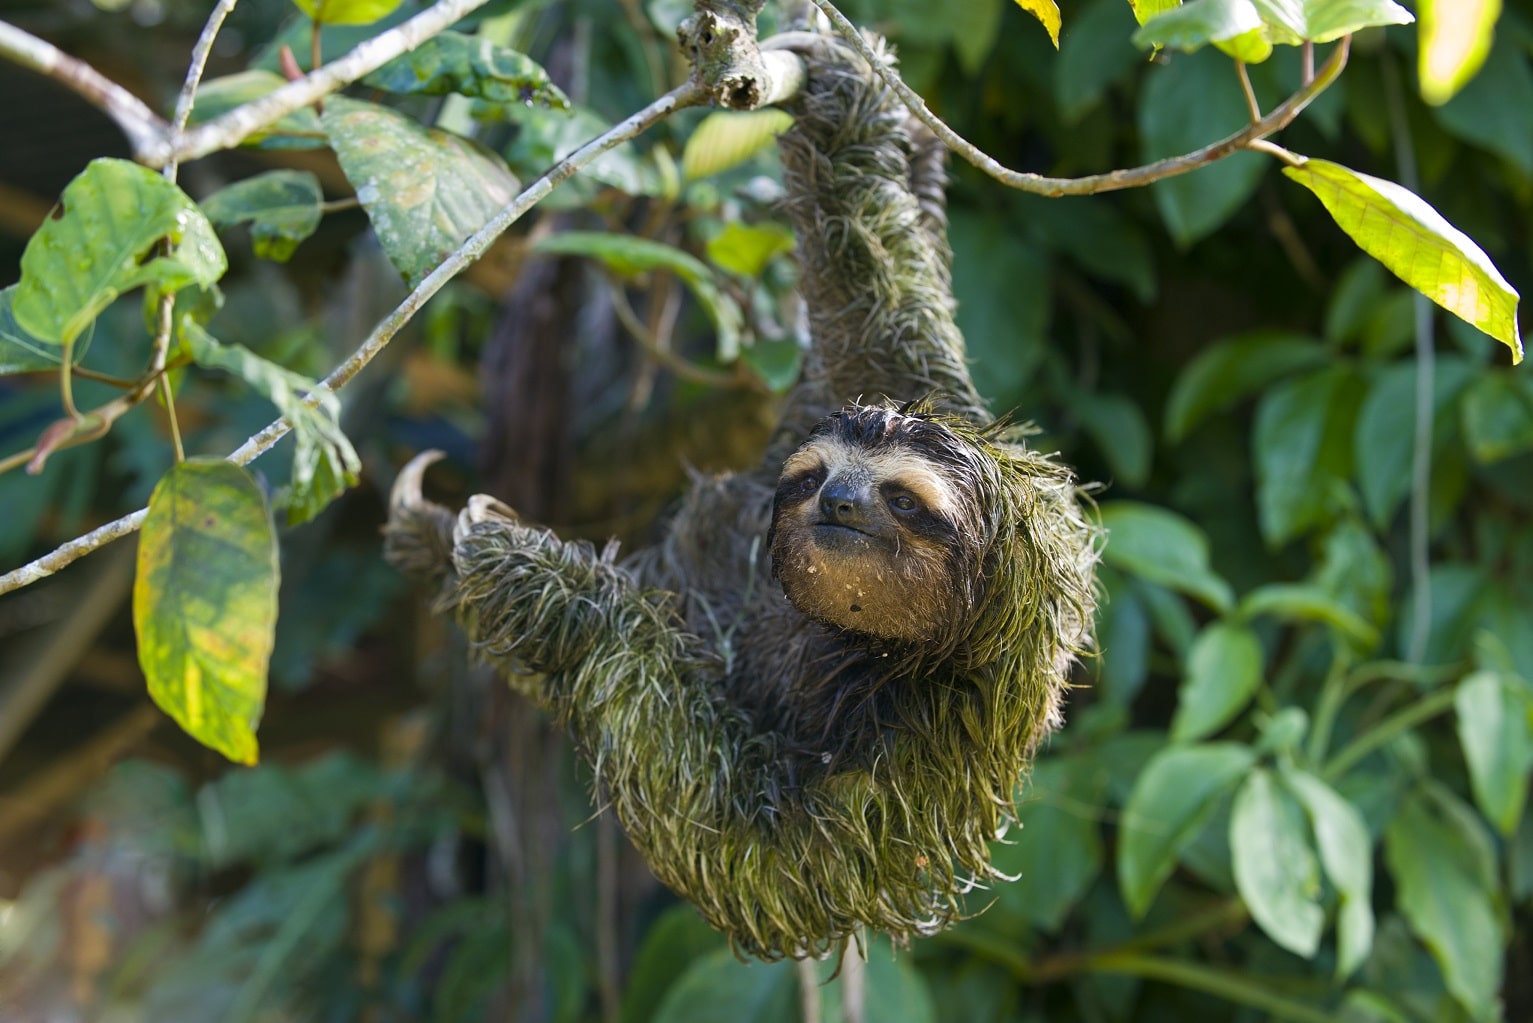 The Green Sloth shares a symbiotic relationship with algae.